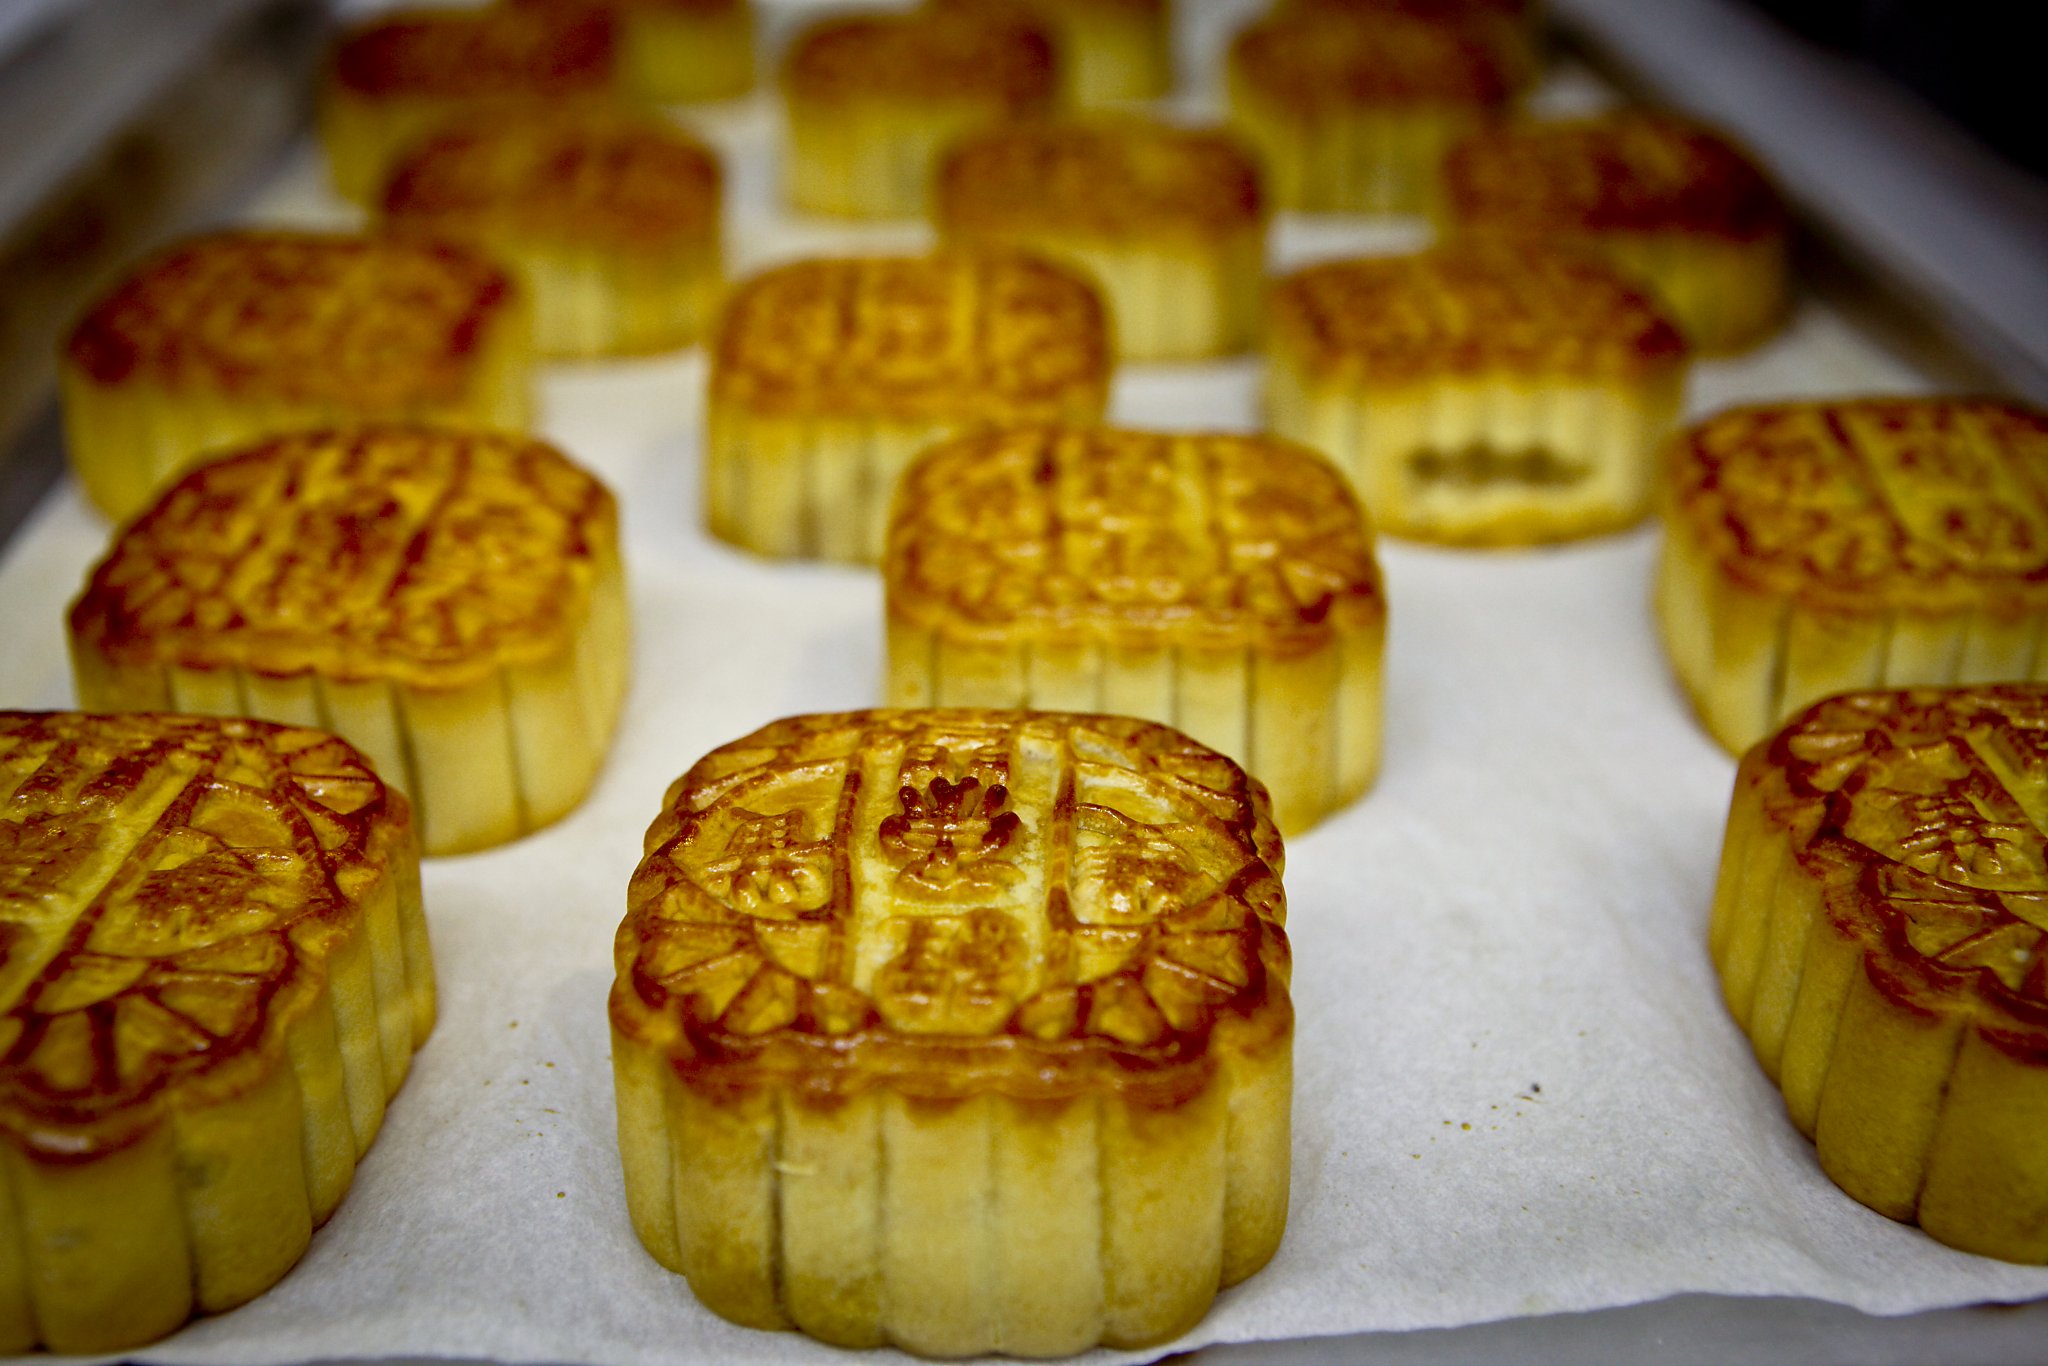 Mid-Autumn festival: Why Asia goes mad for mooncakes, Food News